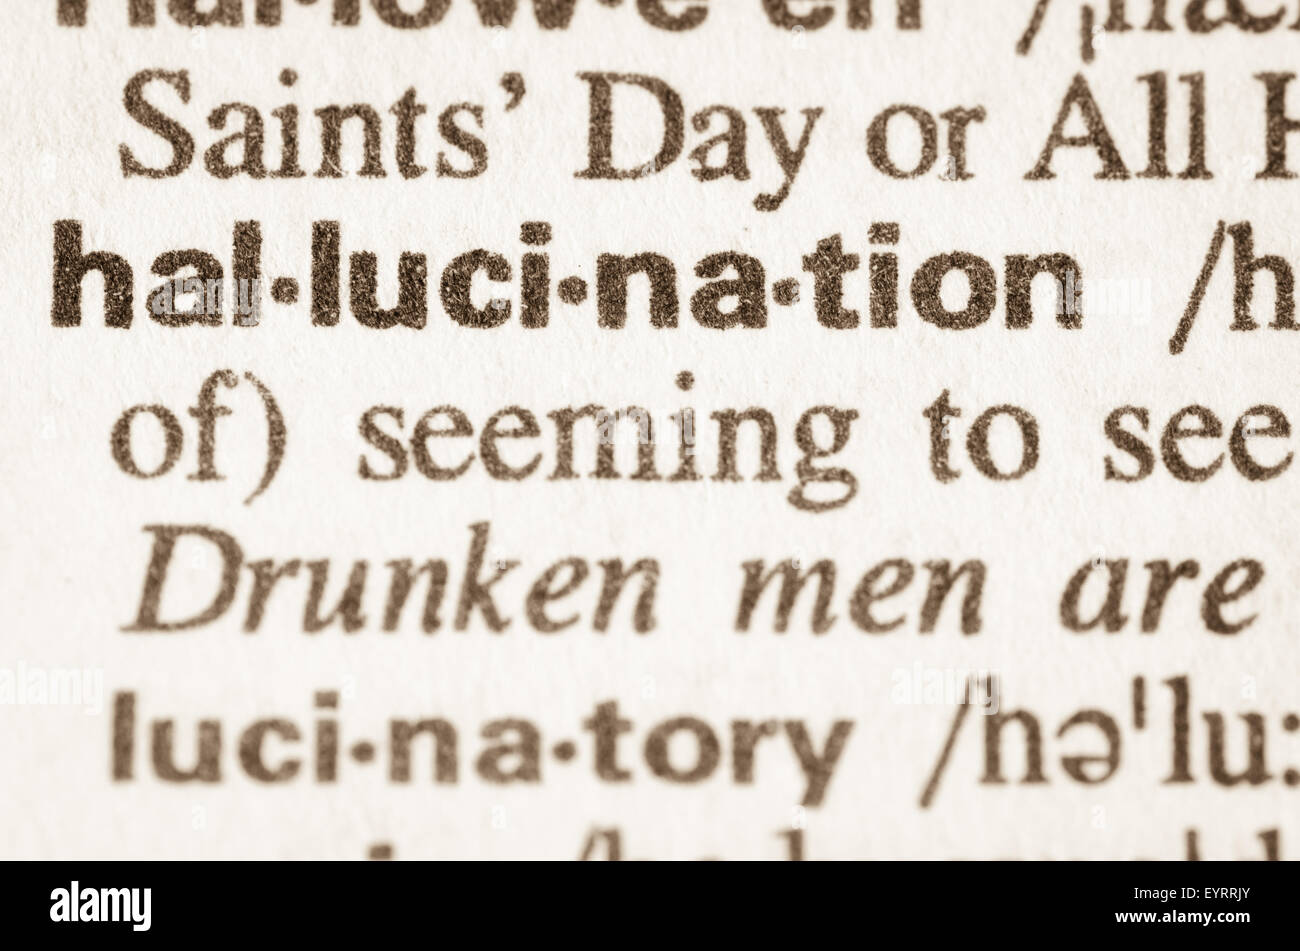 Definition of word hallucination  in dictionary Stock Photo